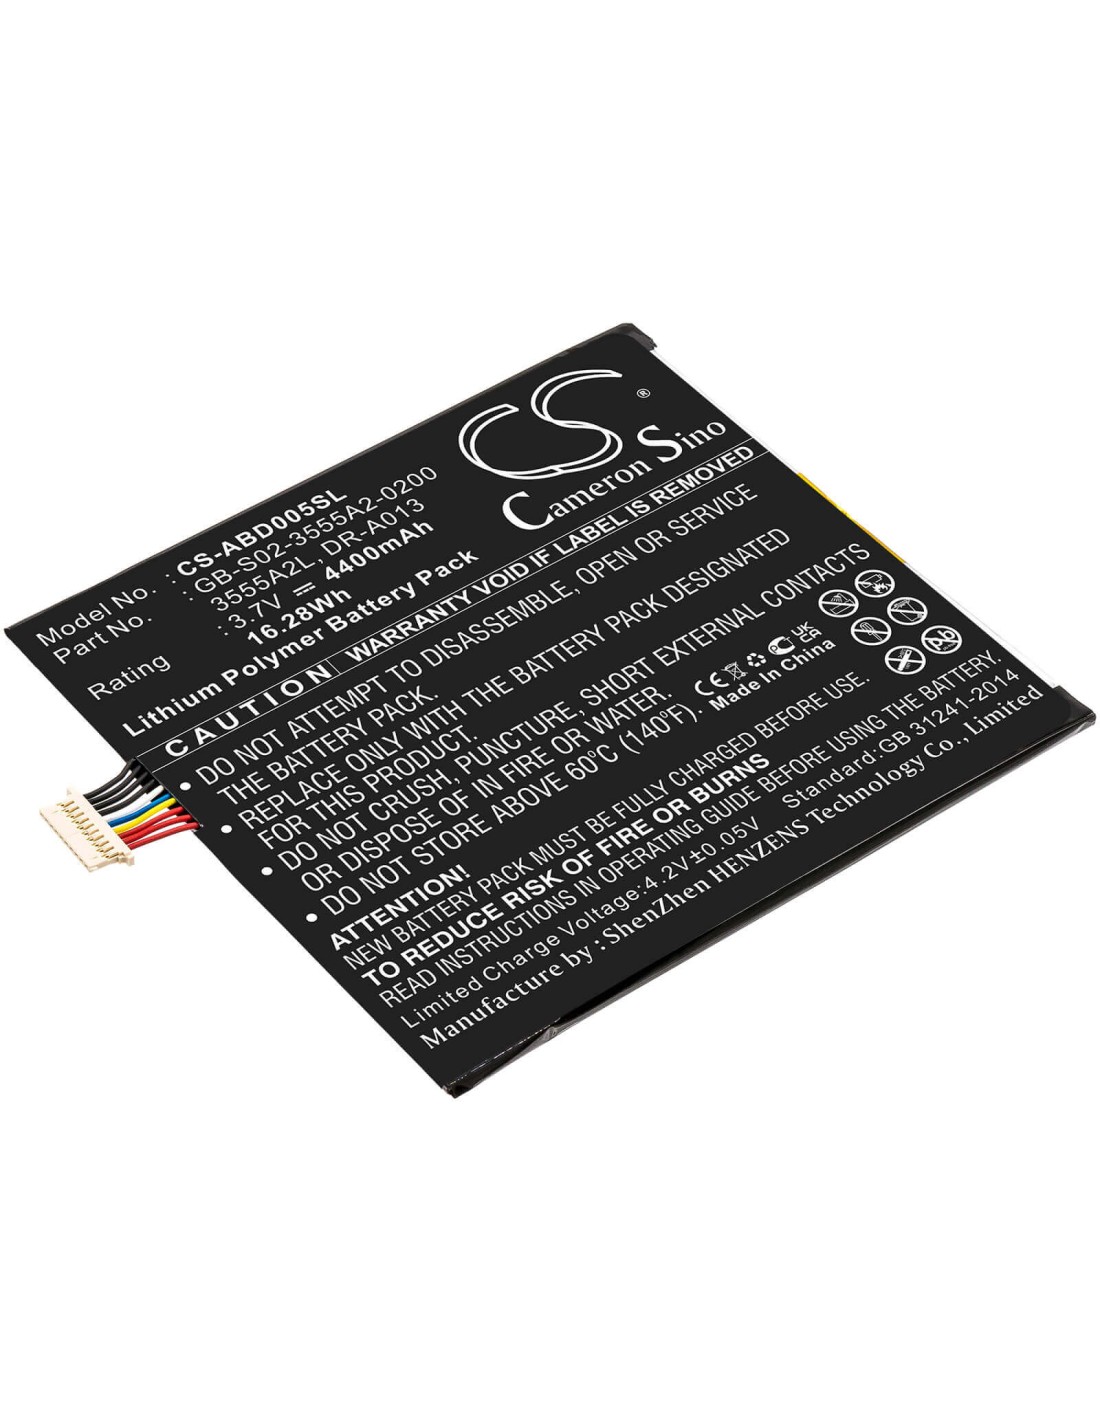 Battery for Amazon Kindle Fire, D01400 3.7V, 4400mAh - 16.28Wh